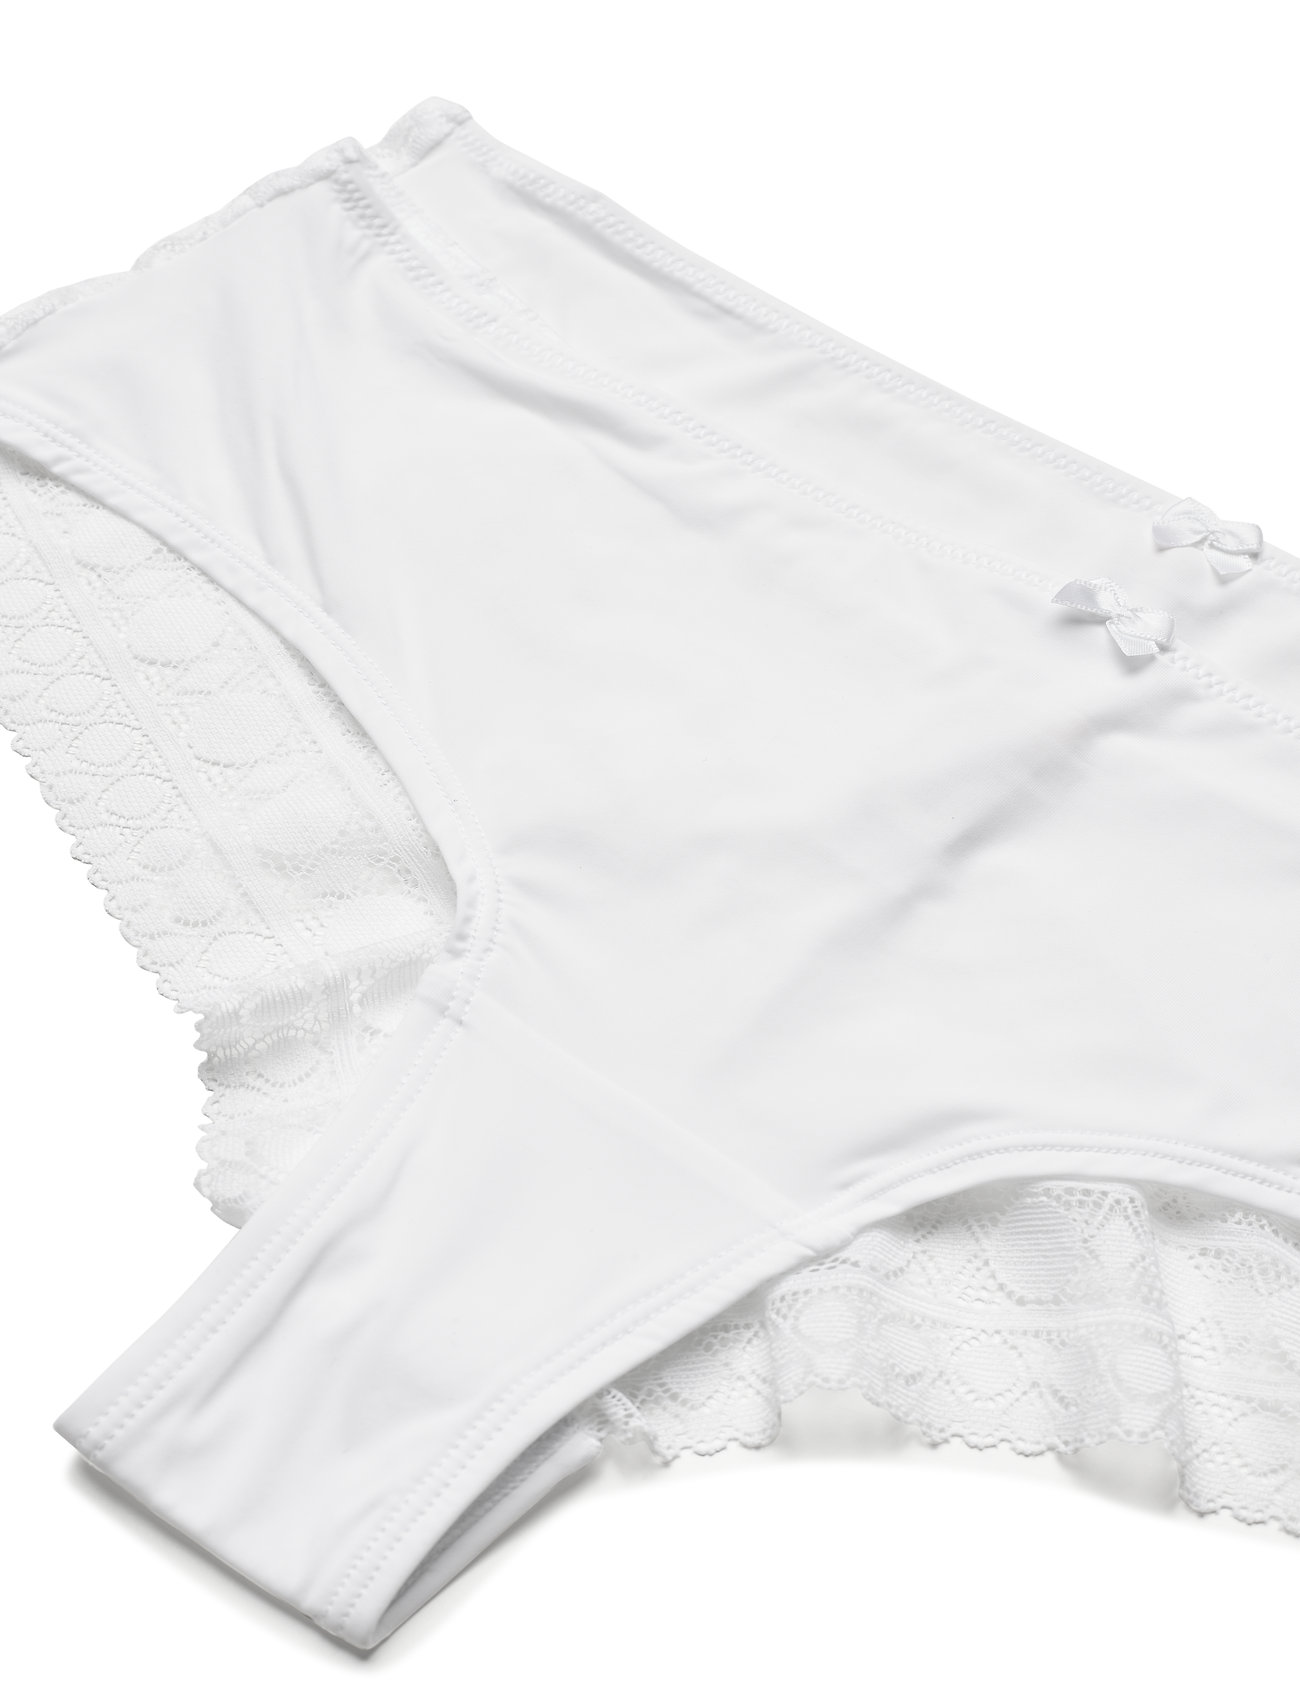 Esprit Bodywear Women - Double pack: Brazilian hipster shorts trimmed with lace - briefs - white - 1